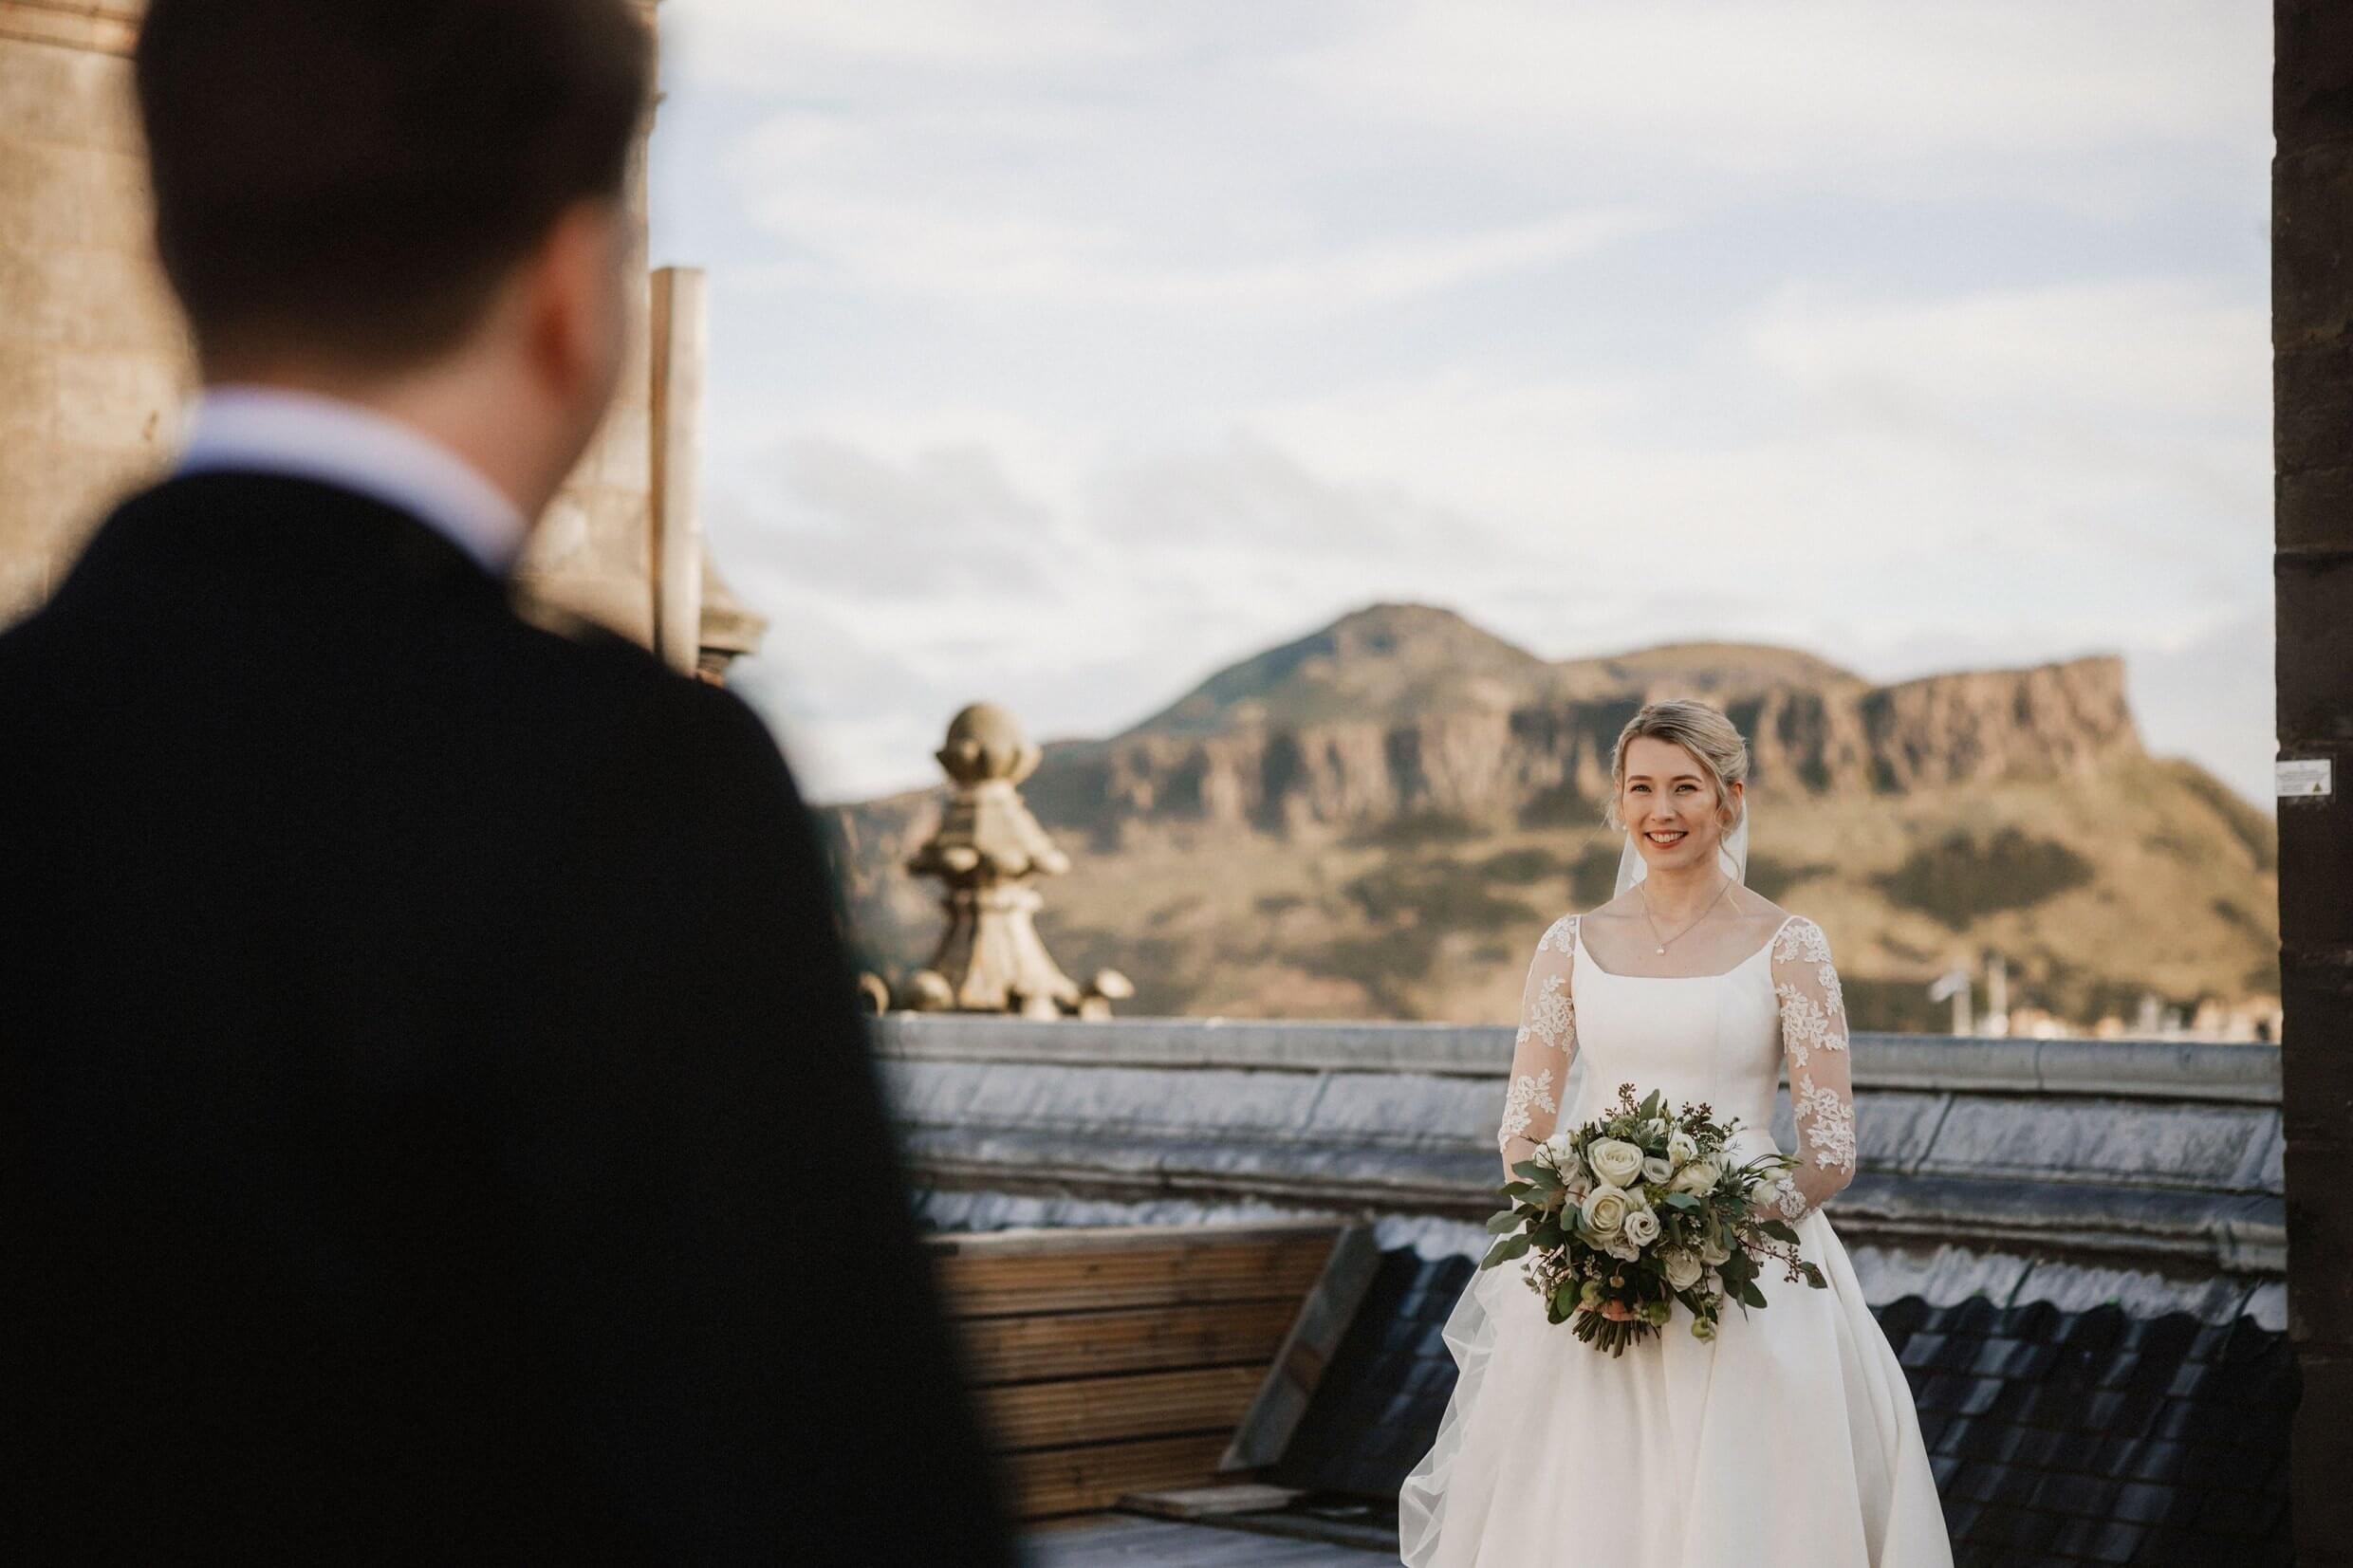 the groom faces the bride on the rooftop of the balmoral hotel edinburgh wedding venue with arthur's seat visible in the background